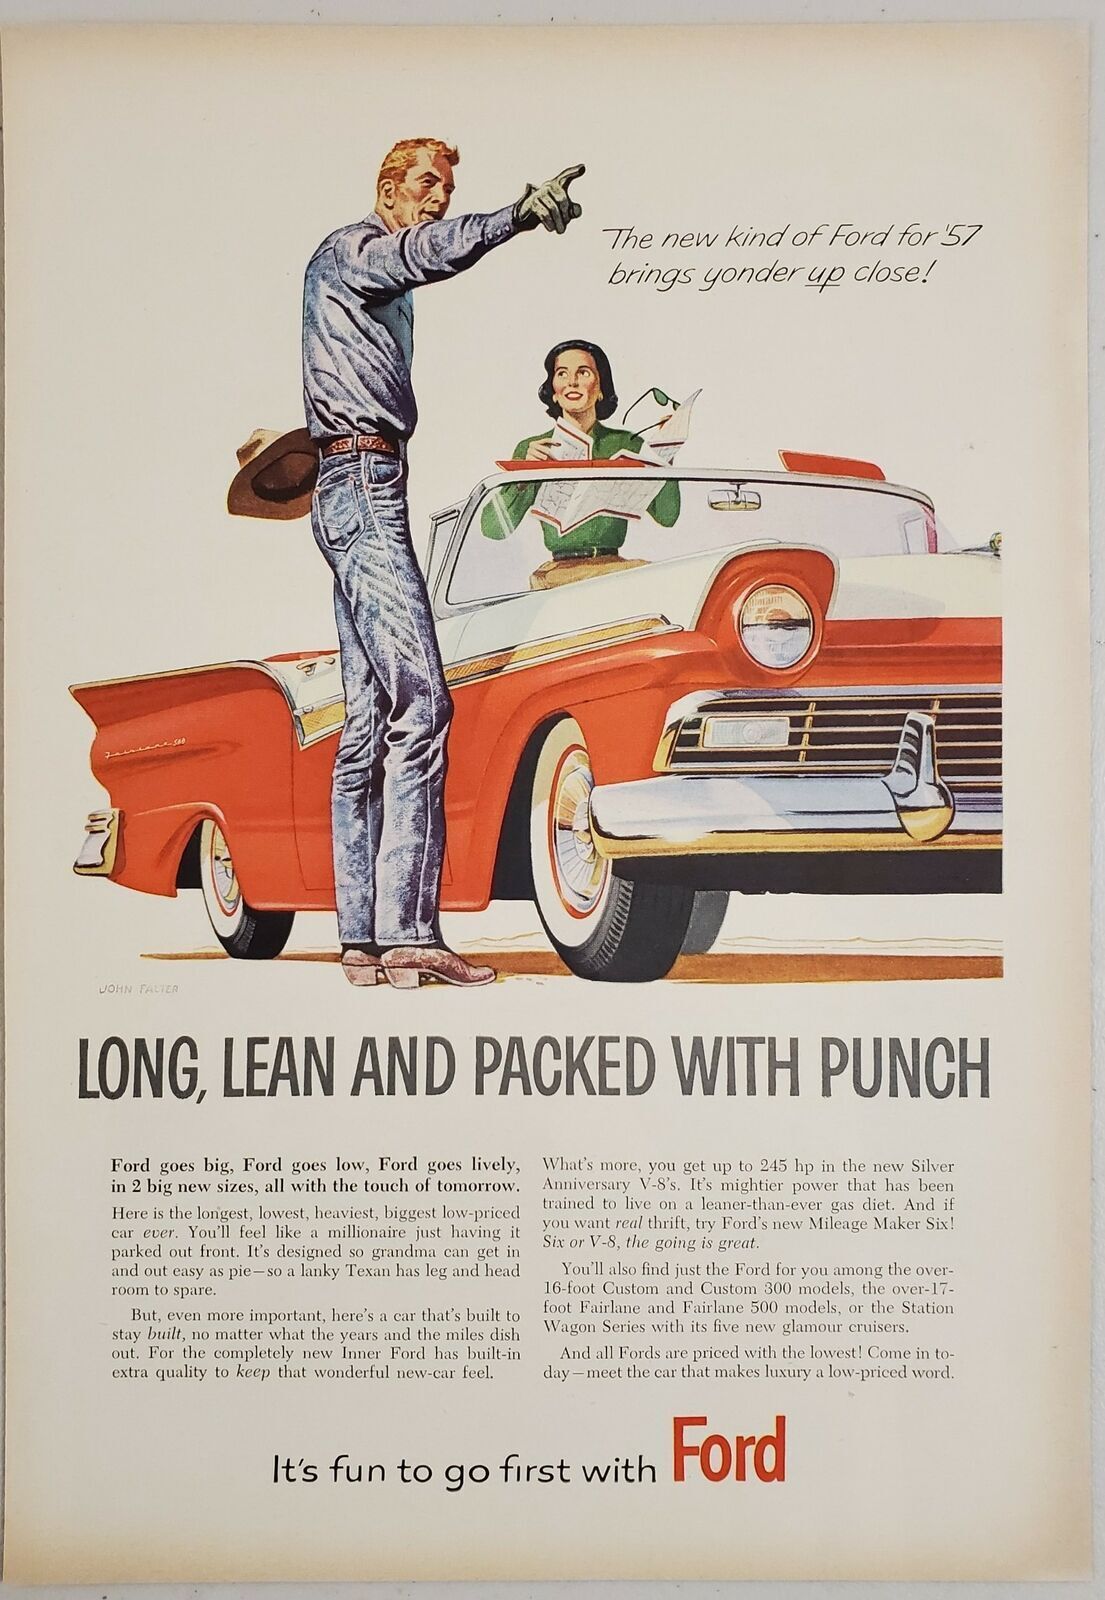 1957 Print Ad Ford Galaxie 500 Convertible Tall,Lean Cowboy Gives Lady Direction